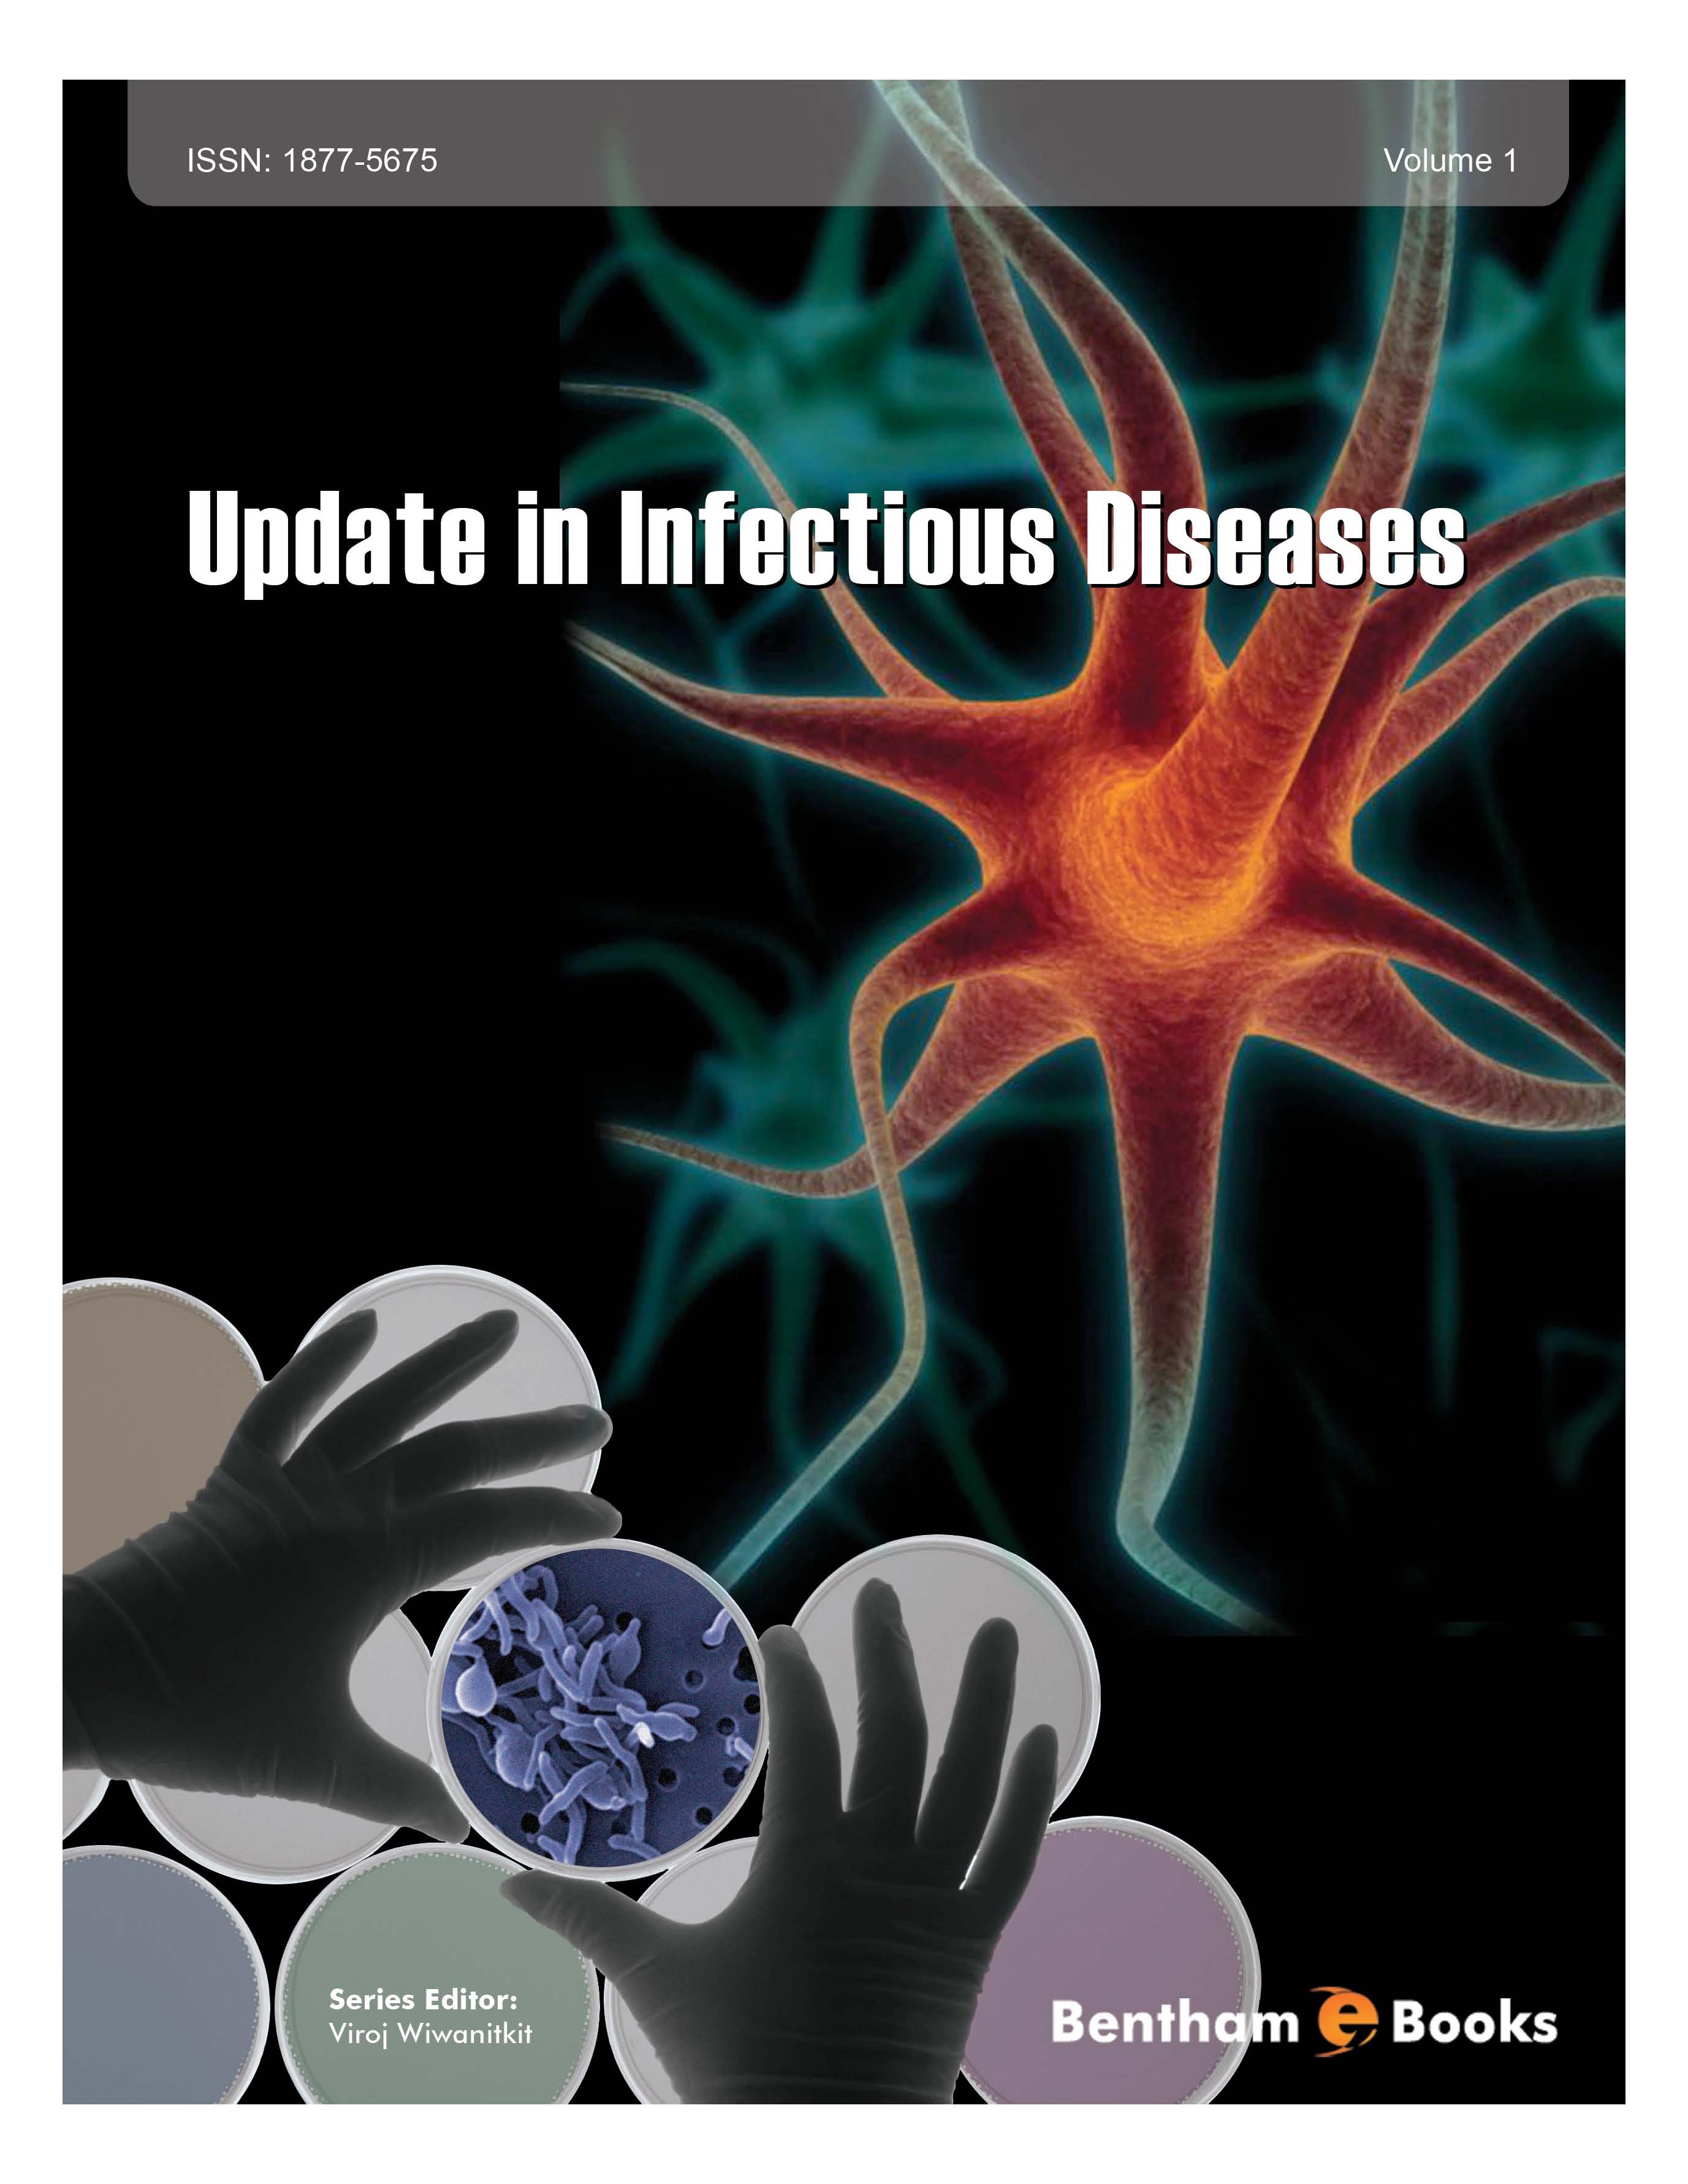 Update in Infectious Diseases